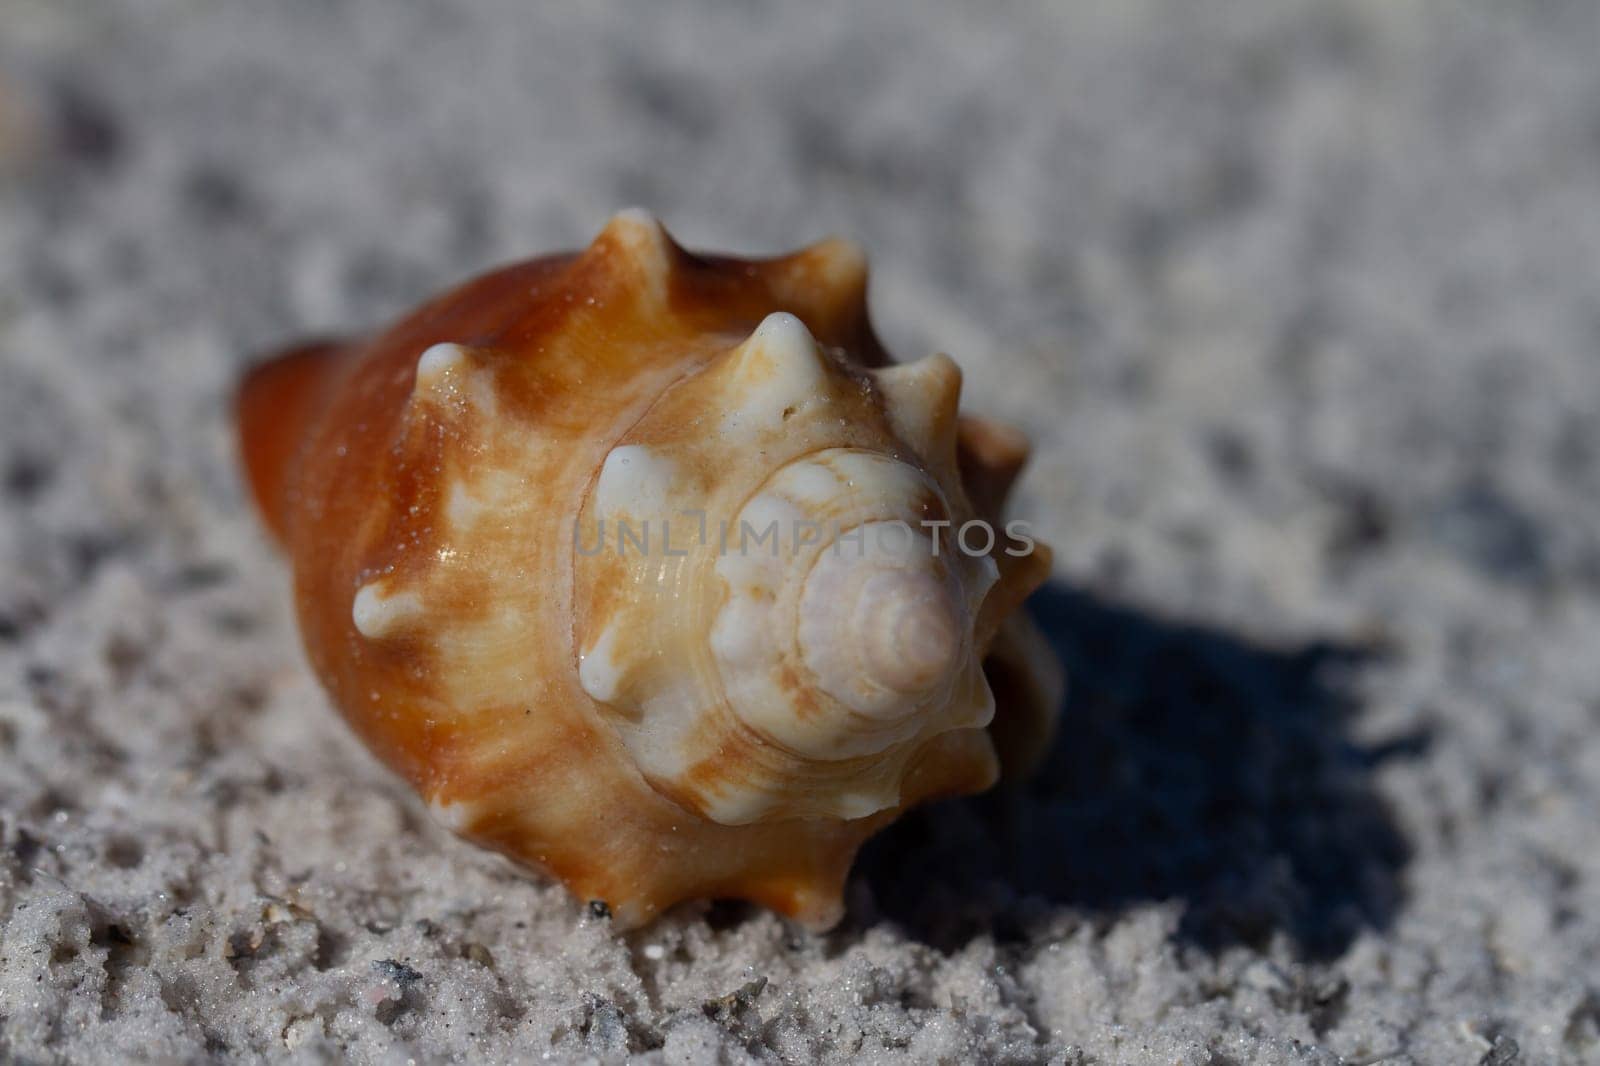 Front view of a Florida fighting conch, Strombus alatus, found on a beach, Naples Florida by Granchinho